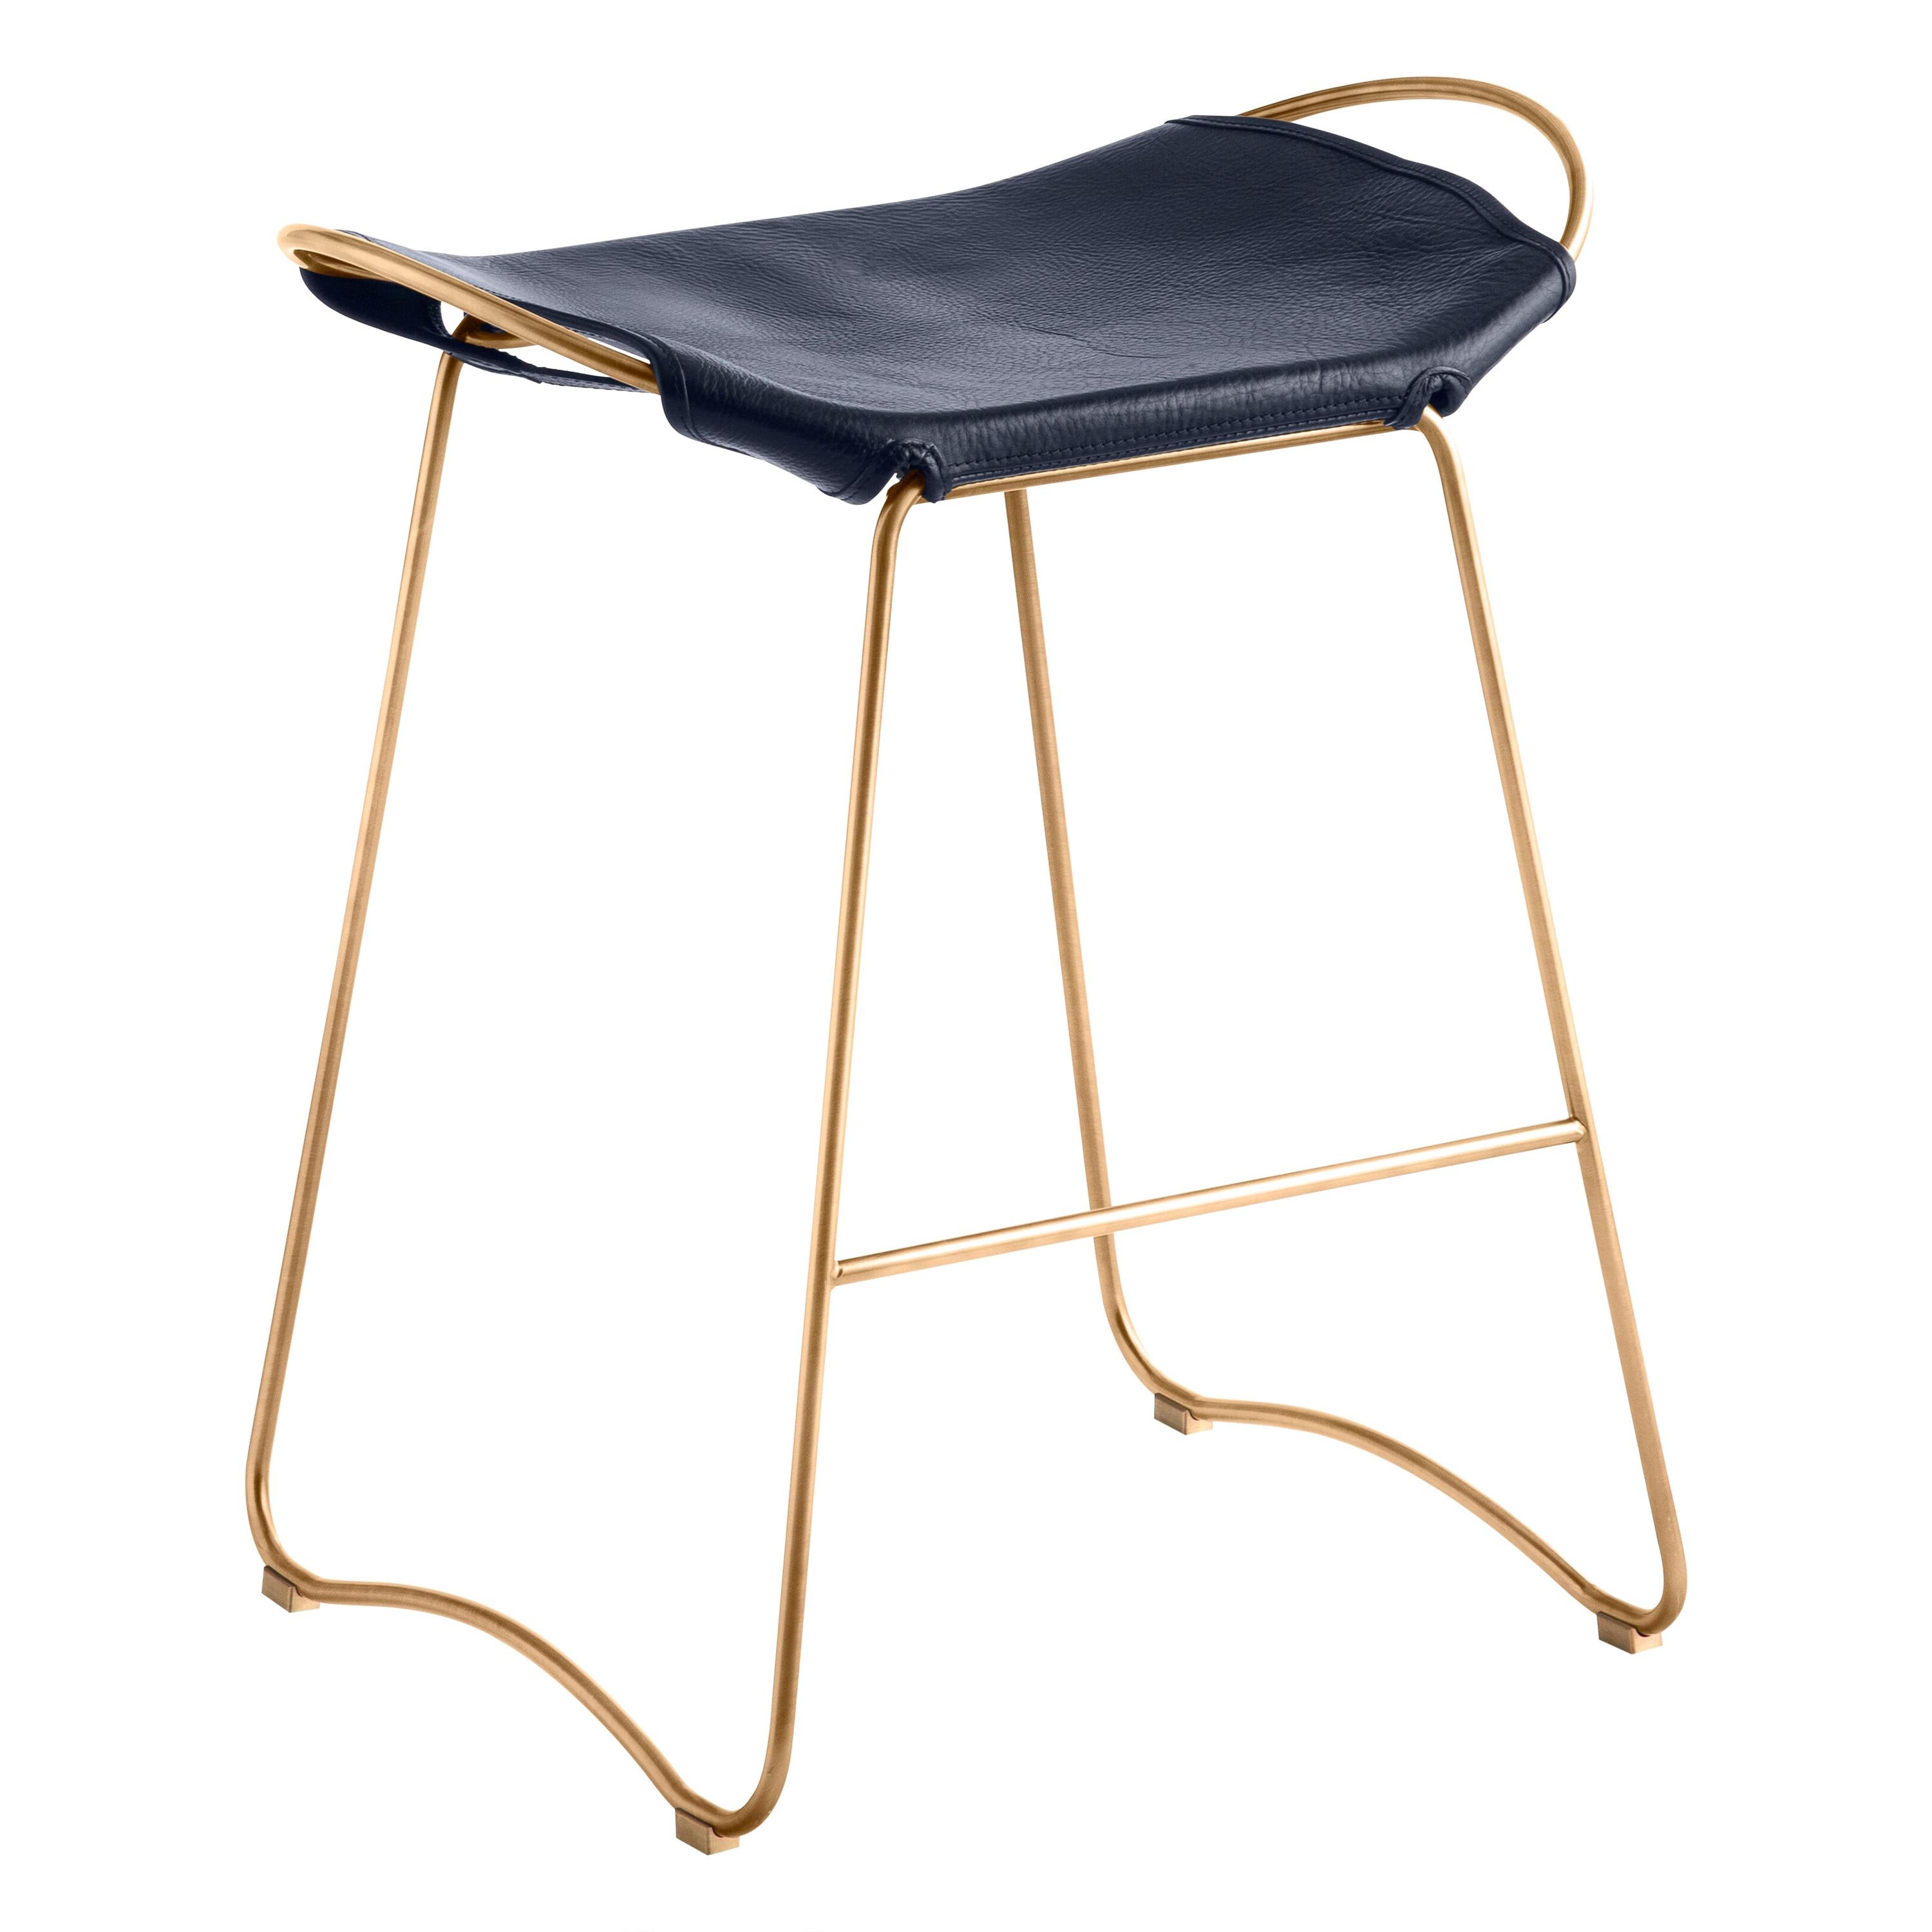 Sculptural Organic Contemporary Bar Stool Aged Brass Metal & Navy Blue Leather